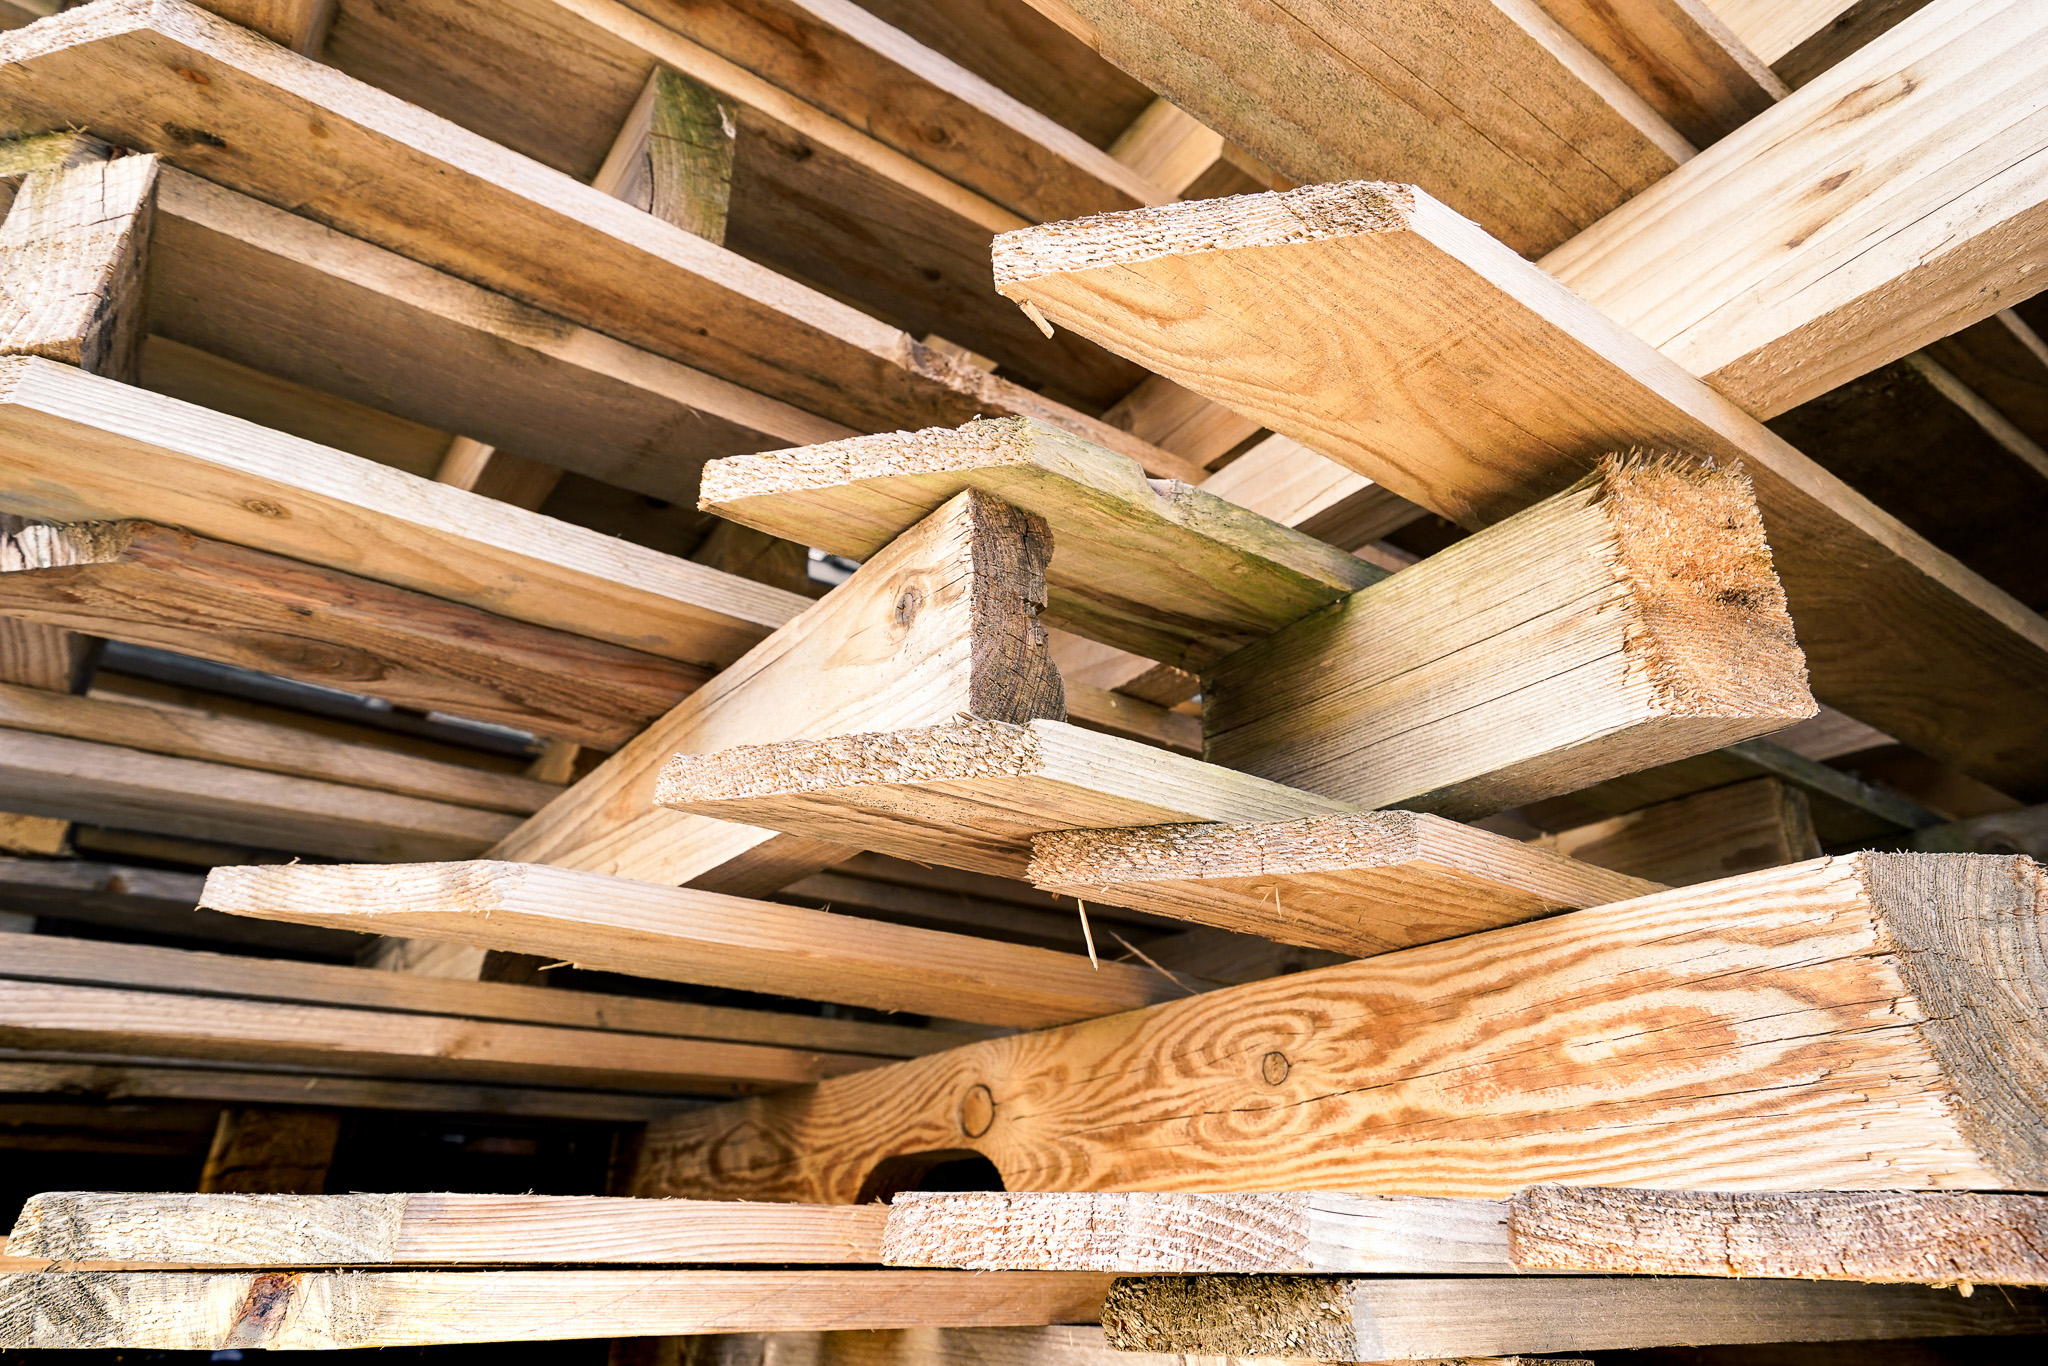 Stacked Plates Of Wood In Warehouse For Buildings 2022 12 09 04 44 11 Utc